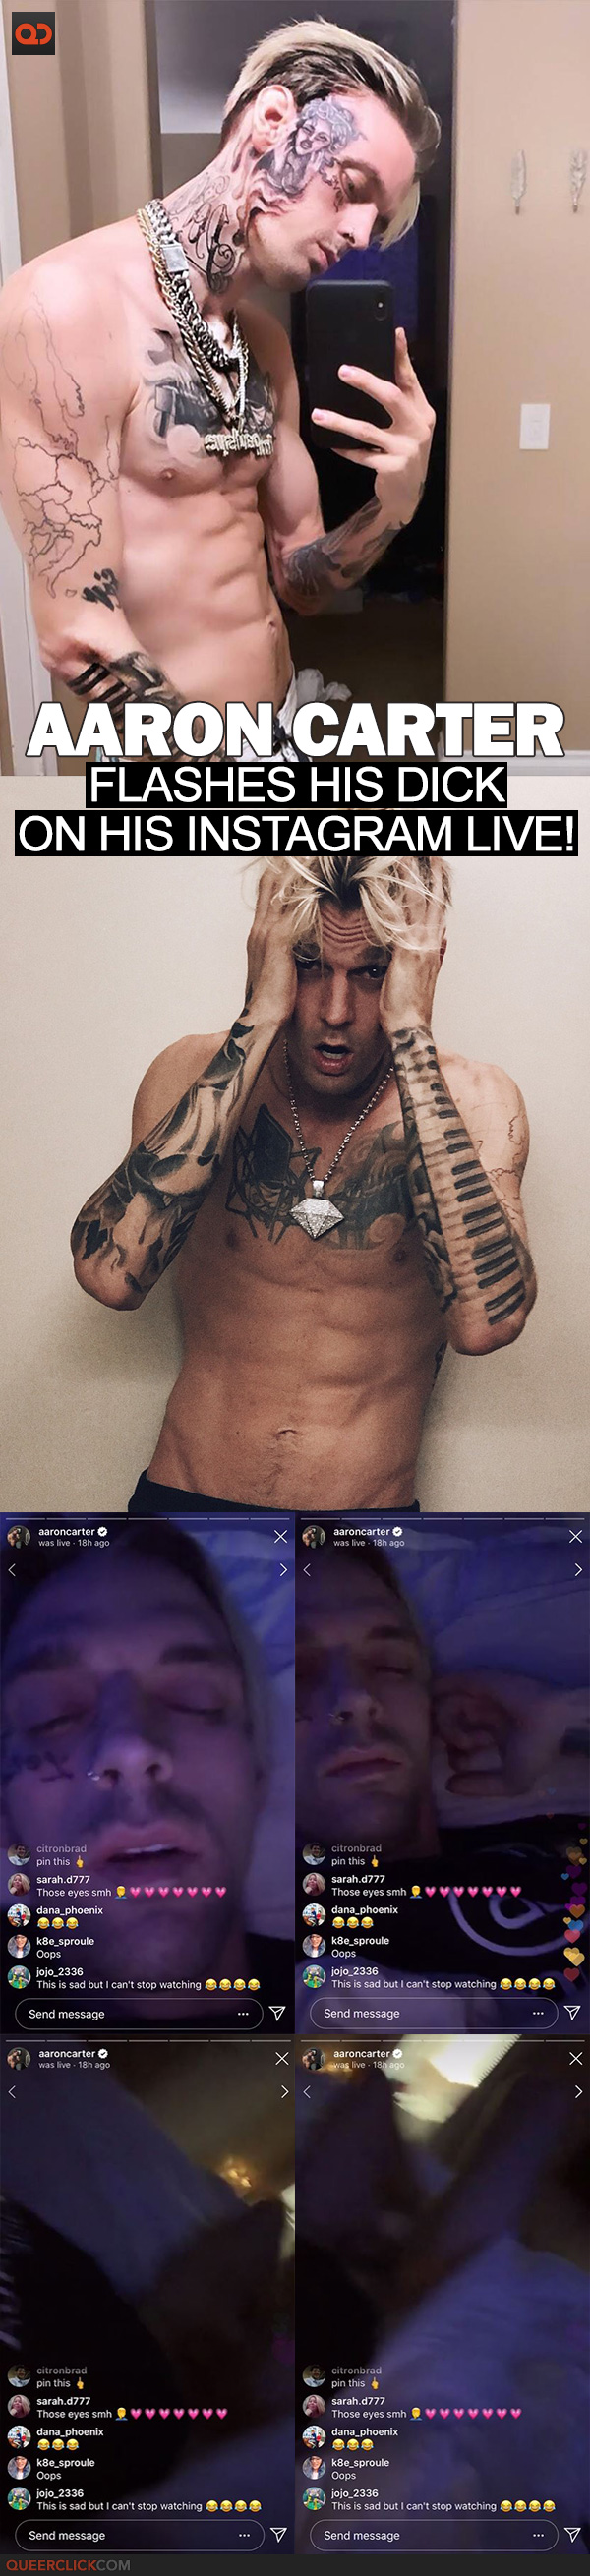 Aaron Carter Flashes His Dick On Instagram Live!